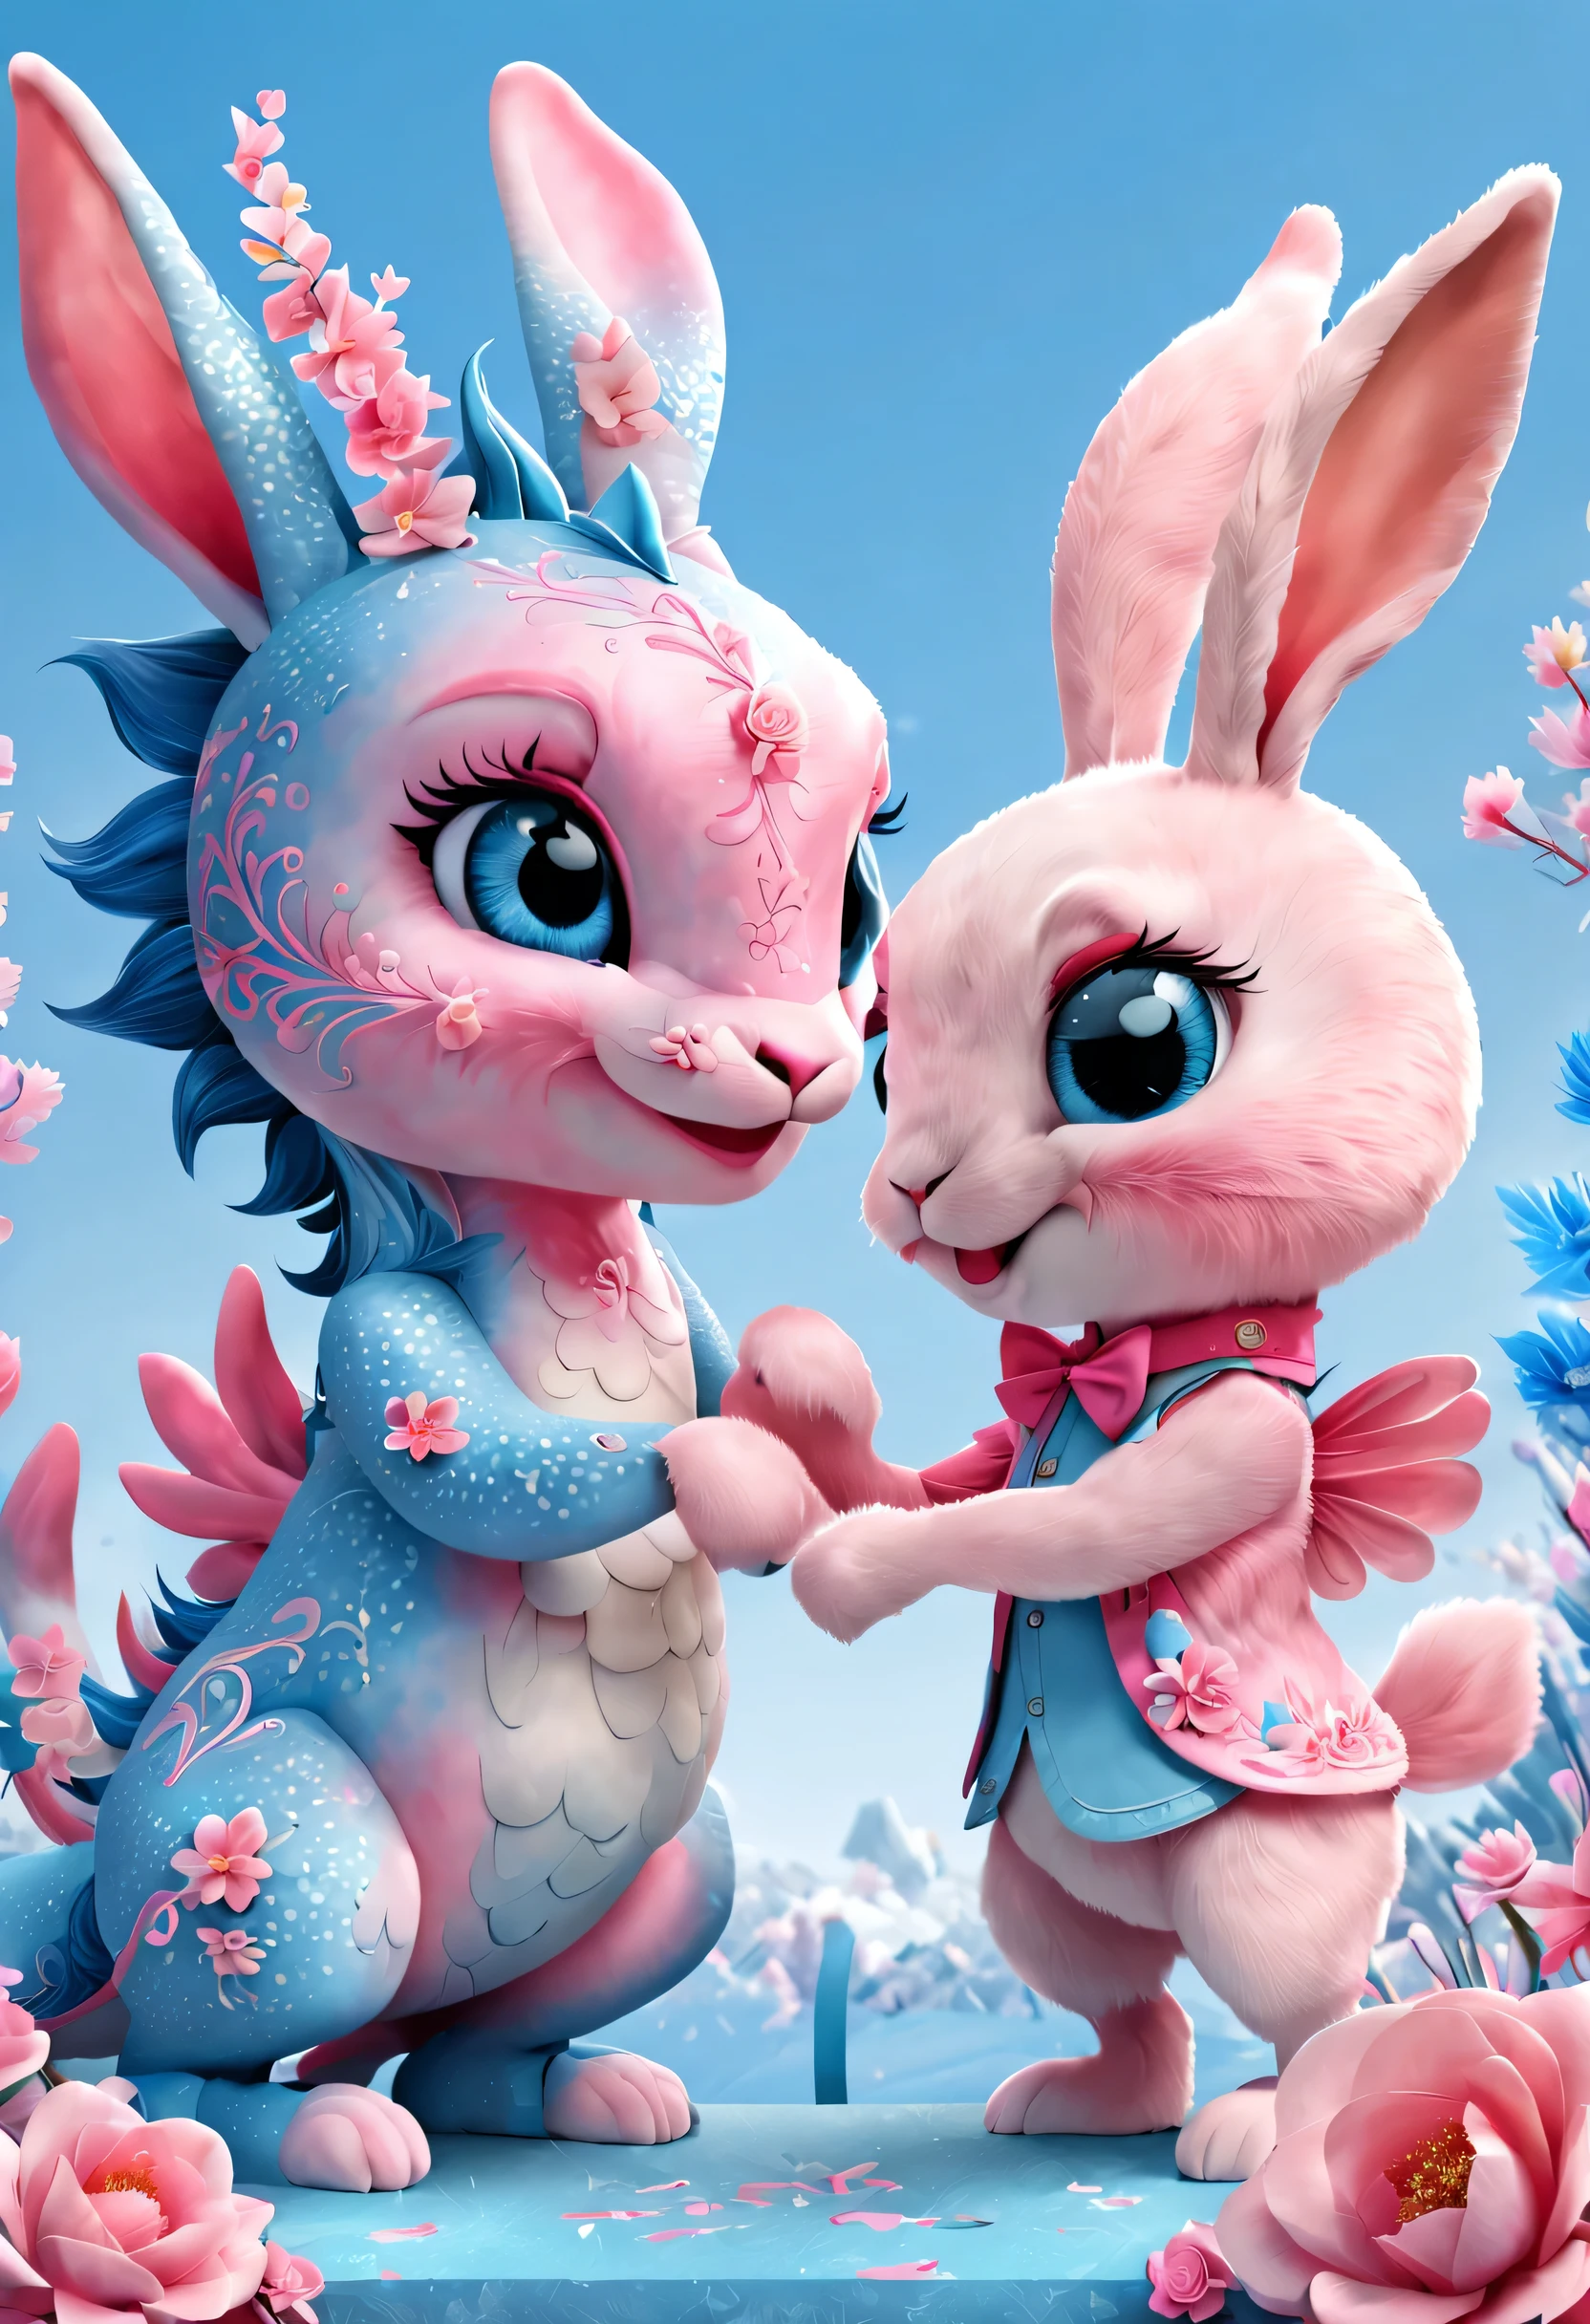 （2024 new year poster design），Pink and blue as main colors， (Cute playful blue zodiac dragon and crying pink parting），Long eyelashes，a happy new year，（2024：1.1）， a happy new year，fresh flowers，